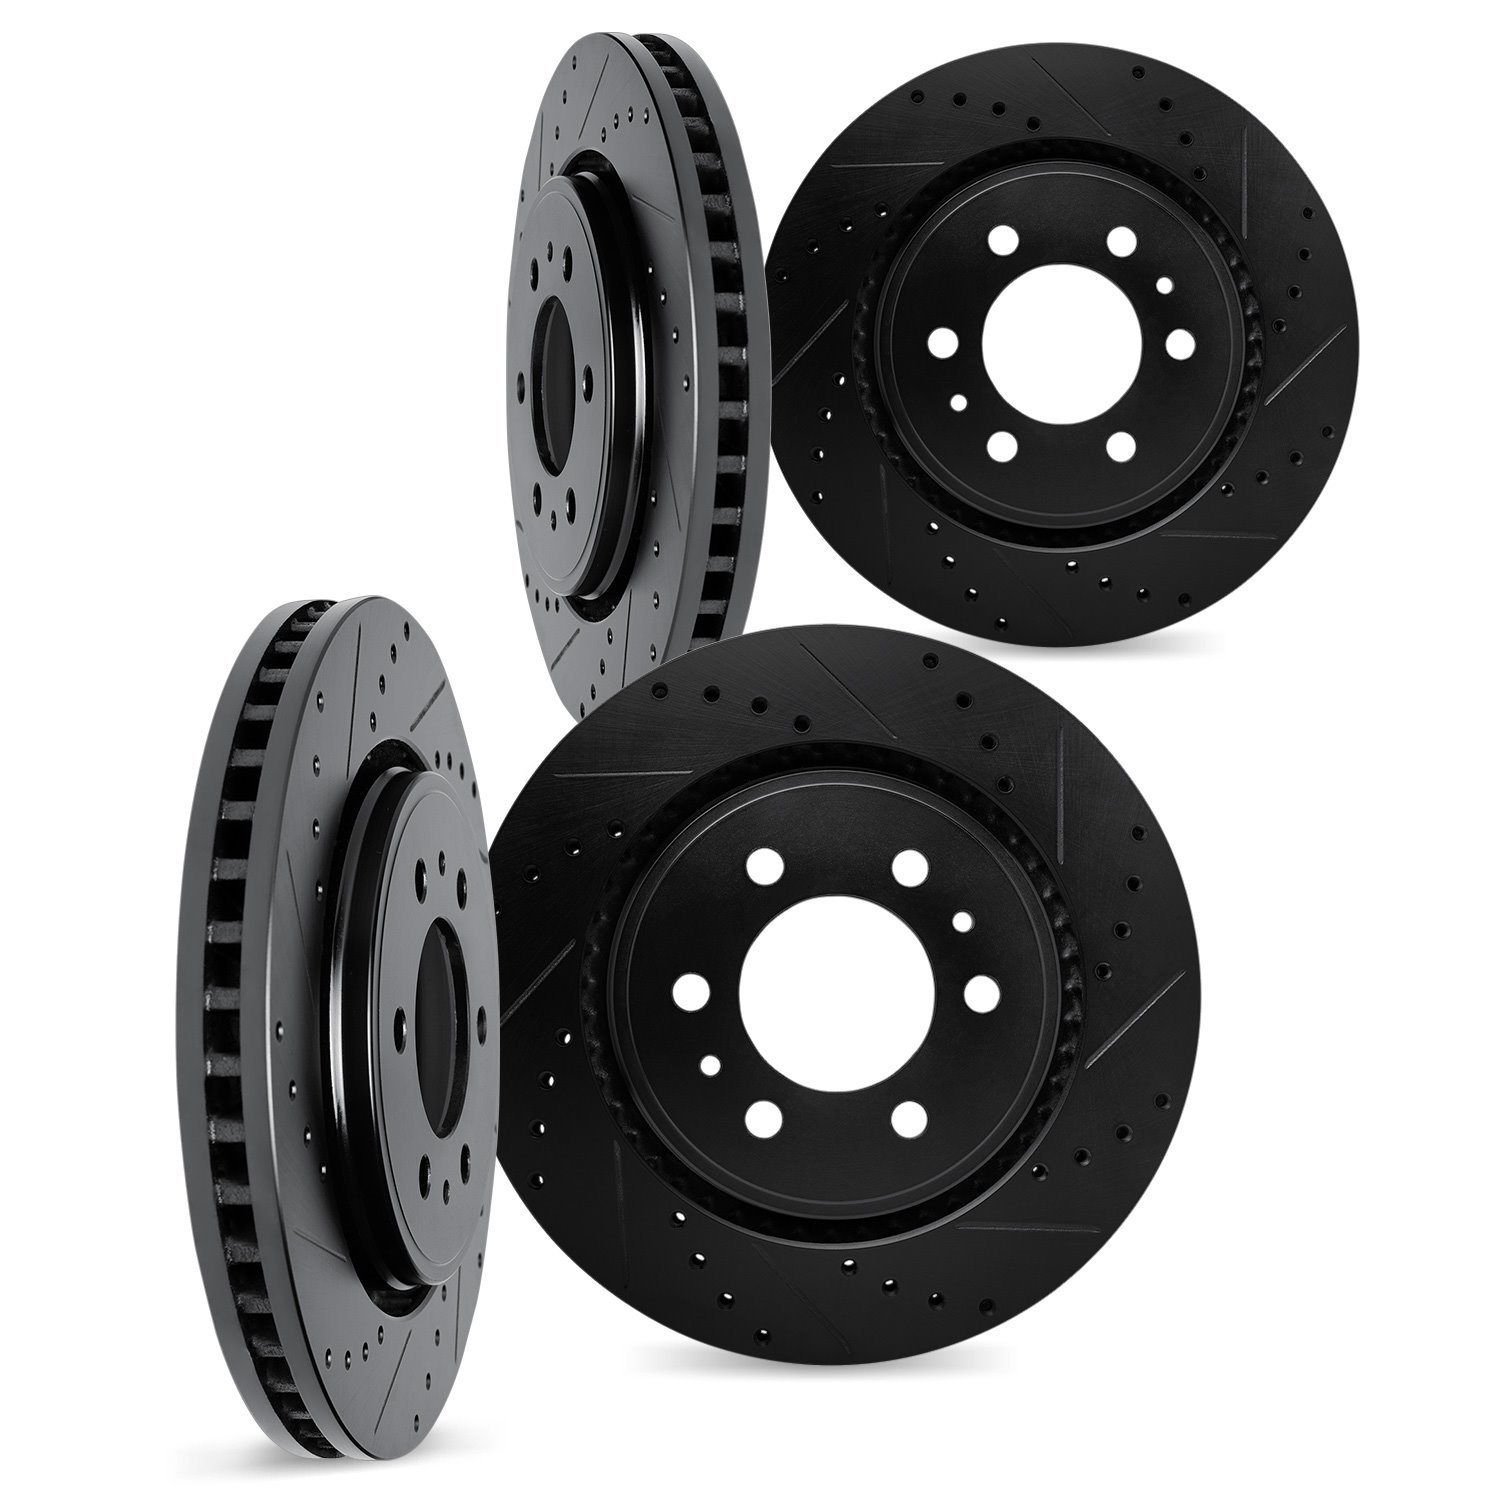 8004-76100 Drilled/Slotted Brake Rotors [Black], 2010-2014 Lexus/Toyota/Scion, Position: Front and Rear